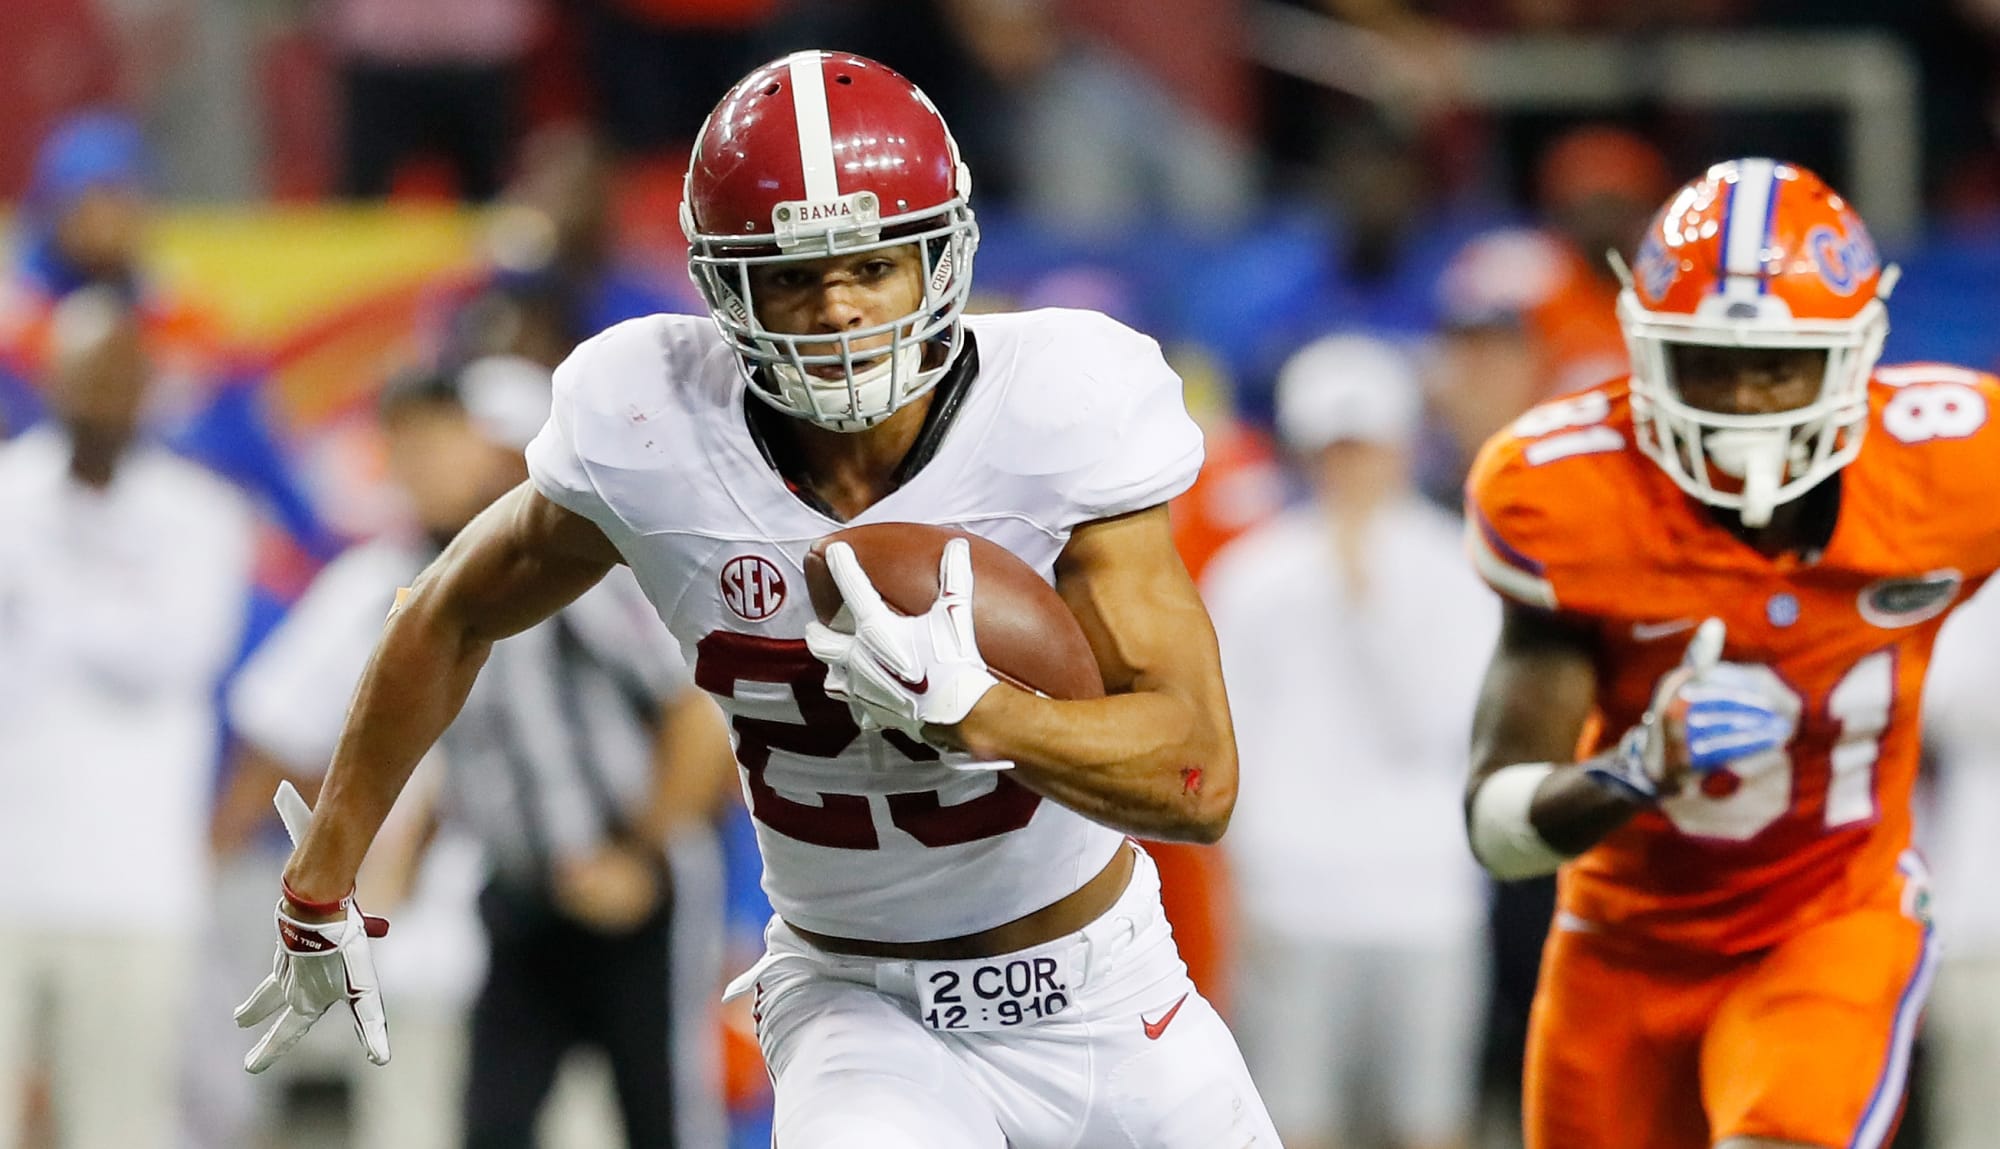 Minkah Fitzpatrick delivers final 'thank you' to Alabama fans